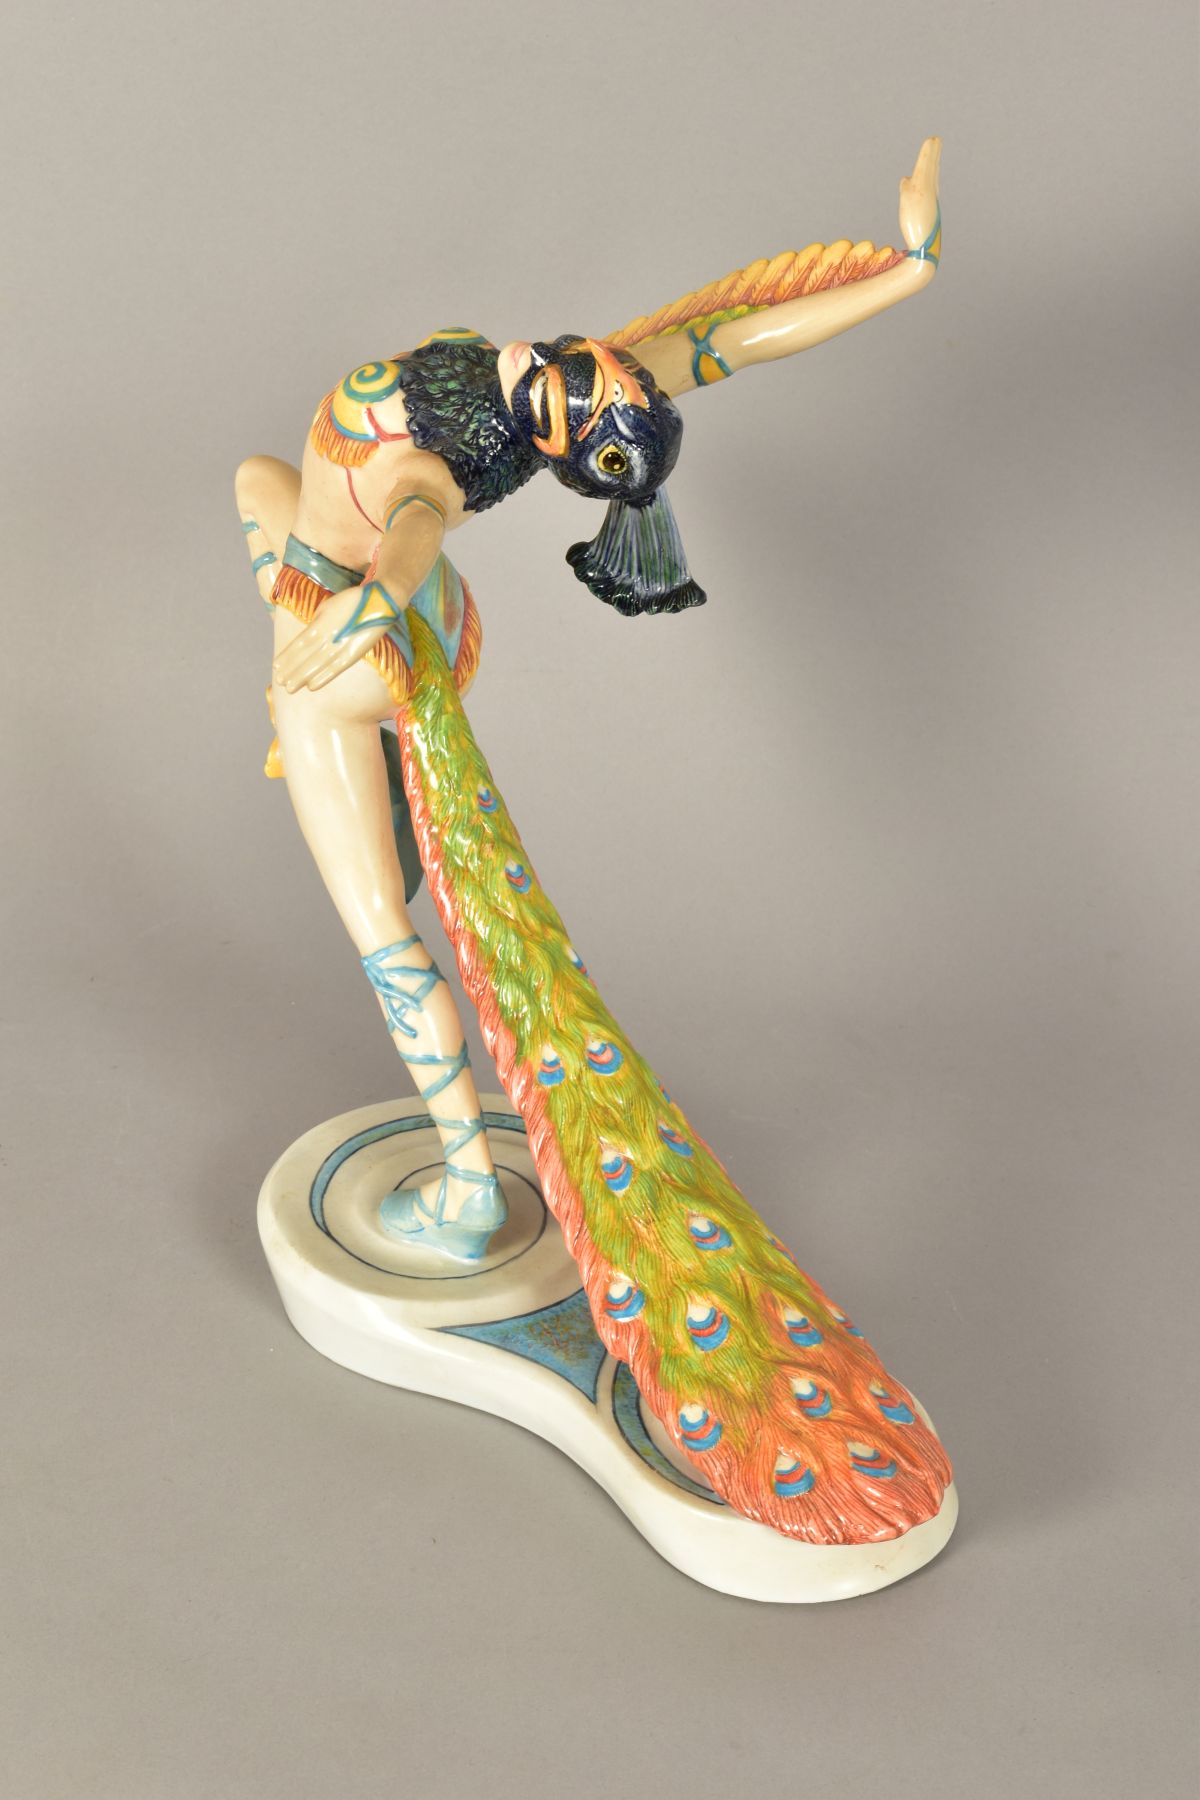 A ROYAL DOULTON LIMITED EDITION PRESTIGE FIGURE 'Bonita' HN5132 from The Carnival Collection Rio - Image 7 of 12